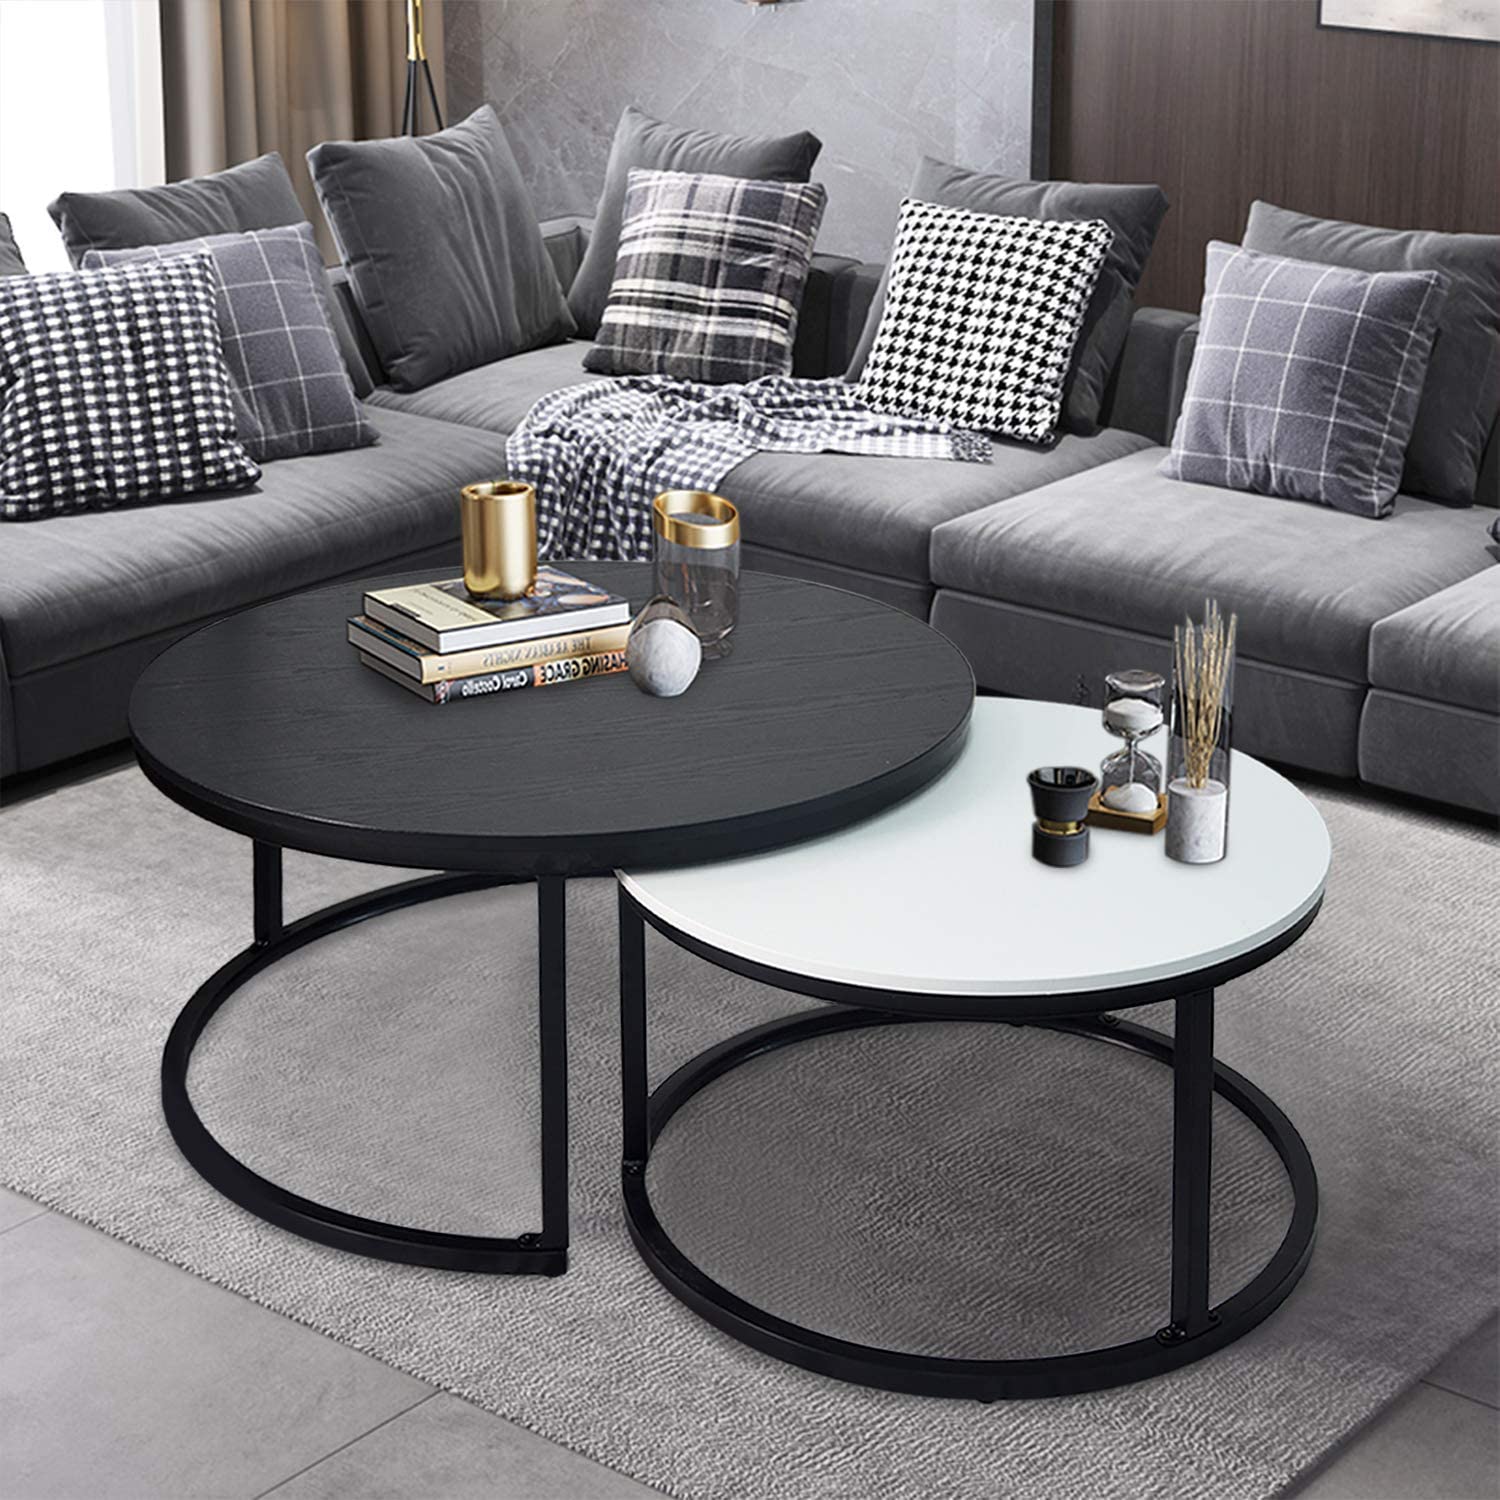 Best Black Coffee Table to Make Your Room Better